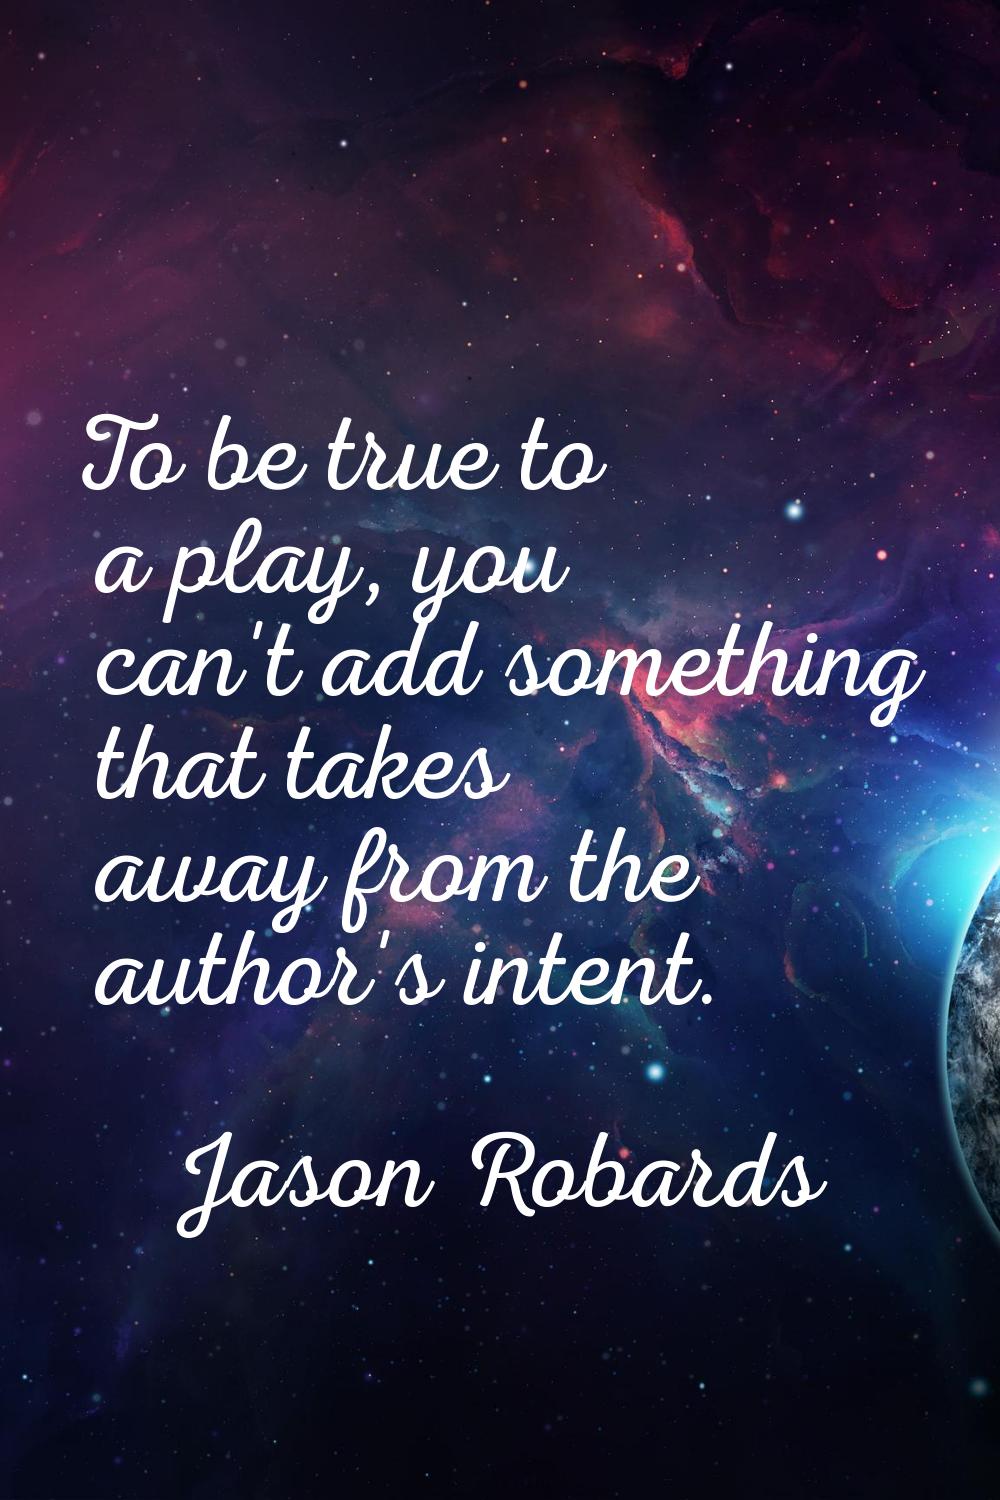 To be true to a play, you can't add something that takes away from the author's intent.